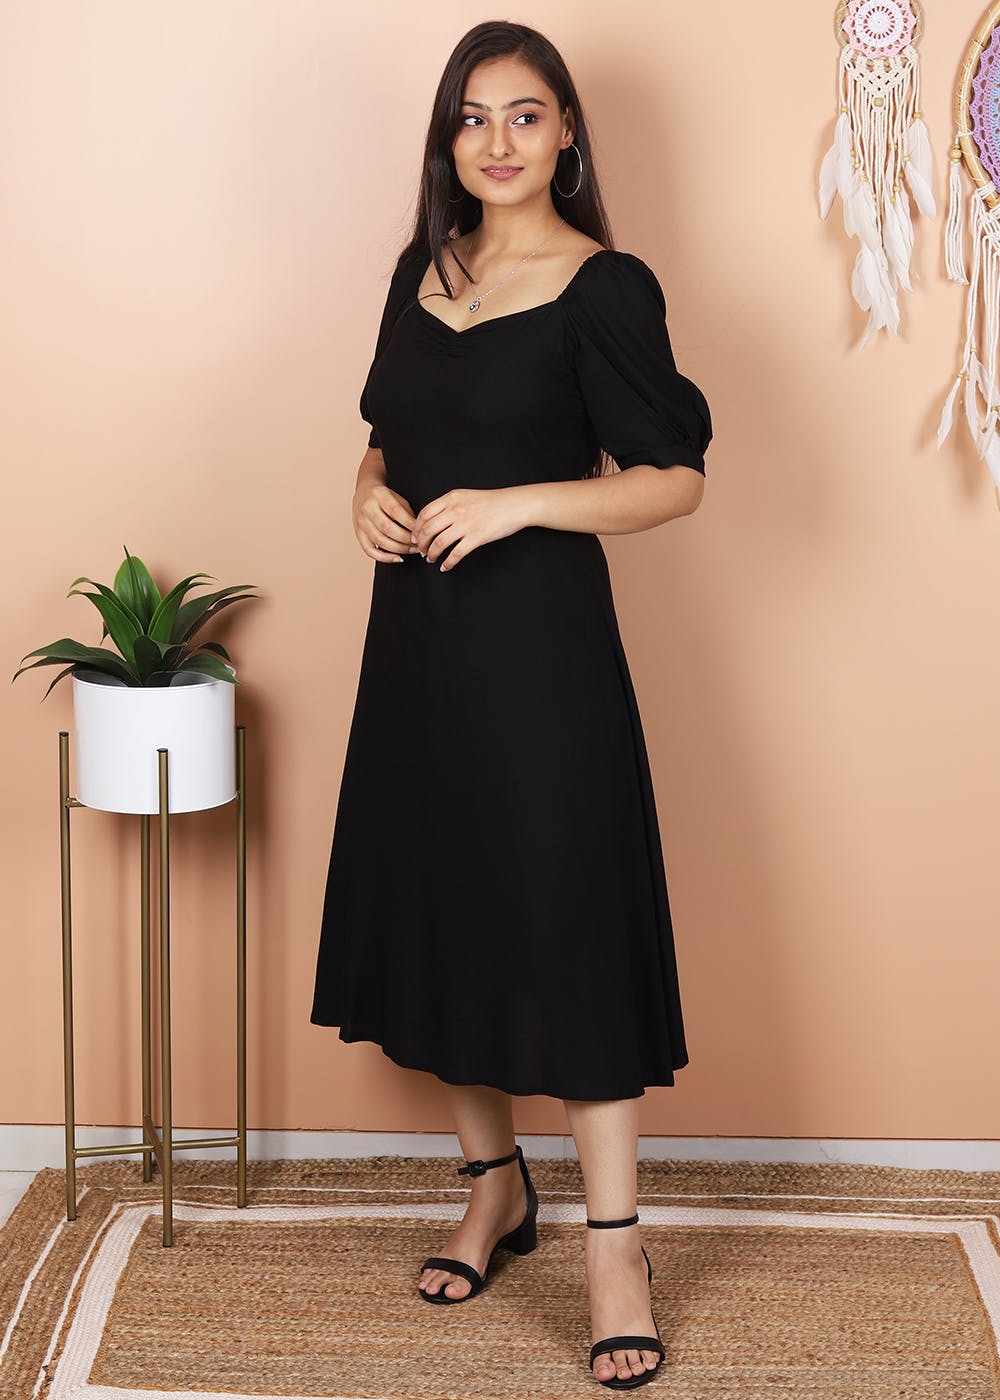 Get Solid Sweetheart Neck A-Line Dress at ₹ 1600 | LBB Shop